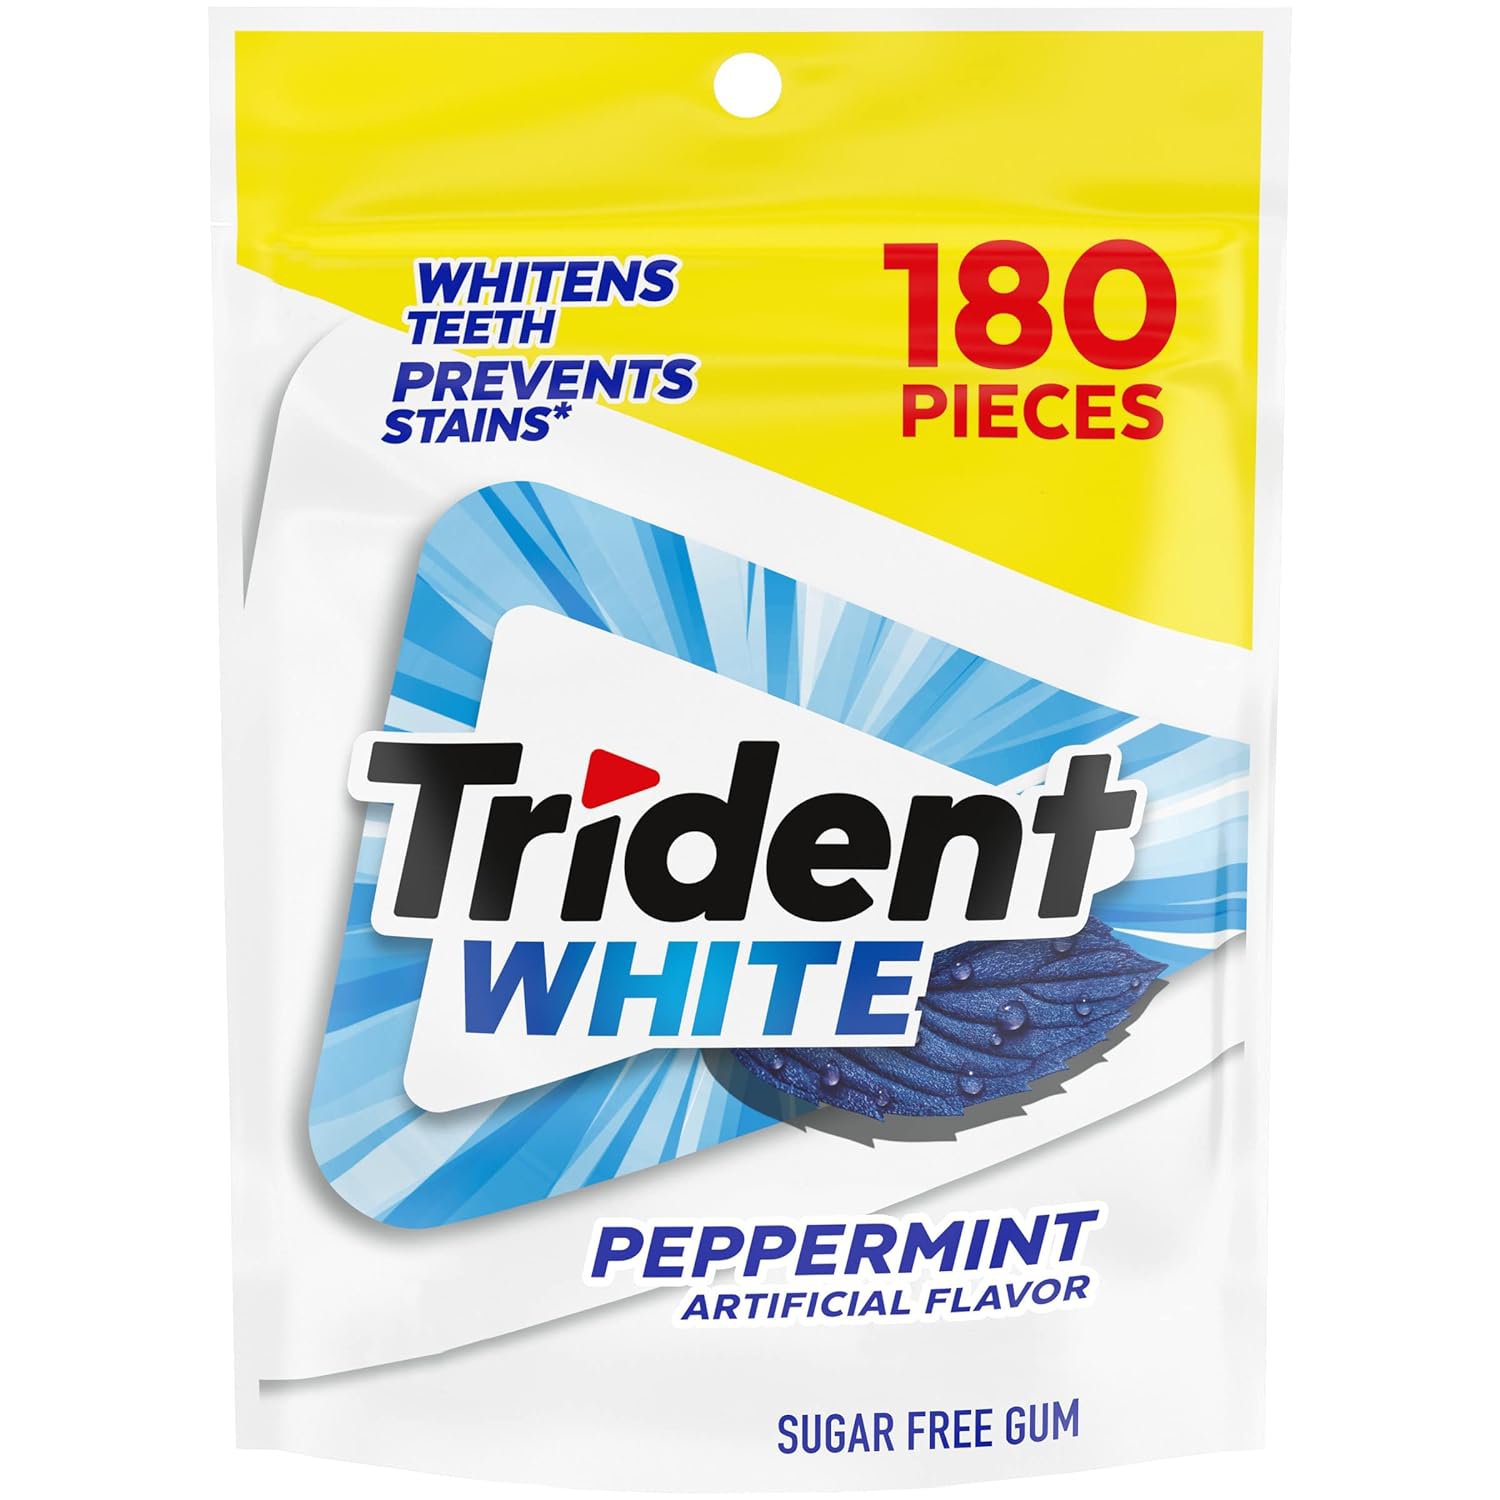 Trident White Peppermint Sugar Free Chewing Gum Whitens Teeth, 180 Pieces